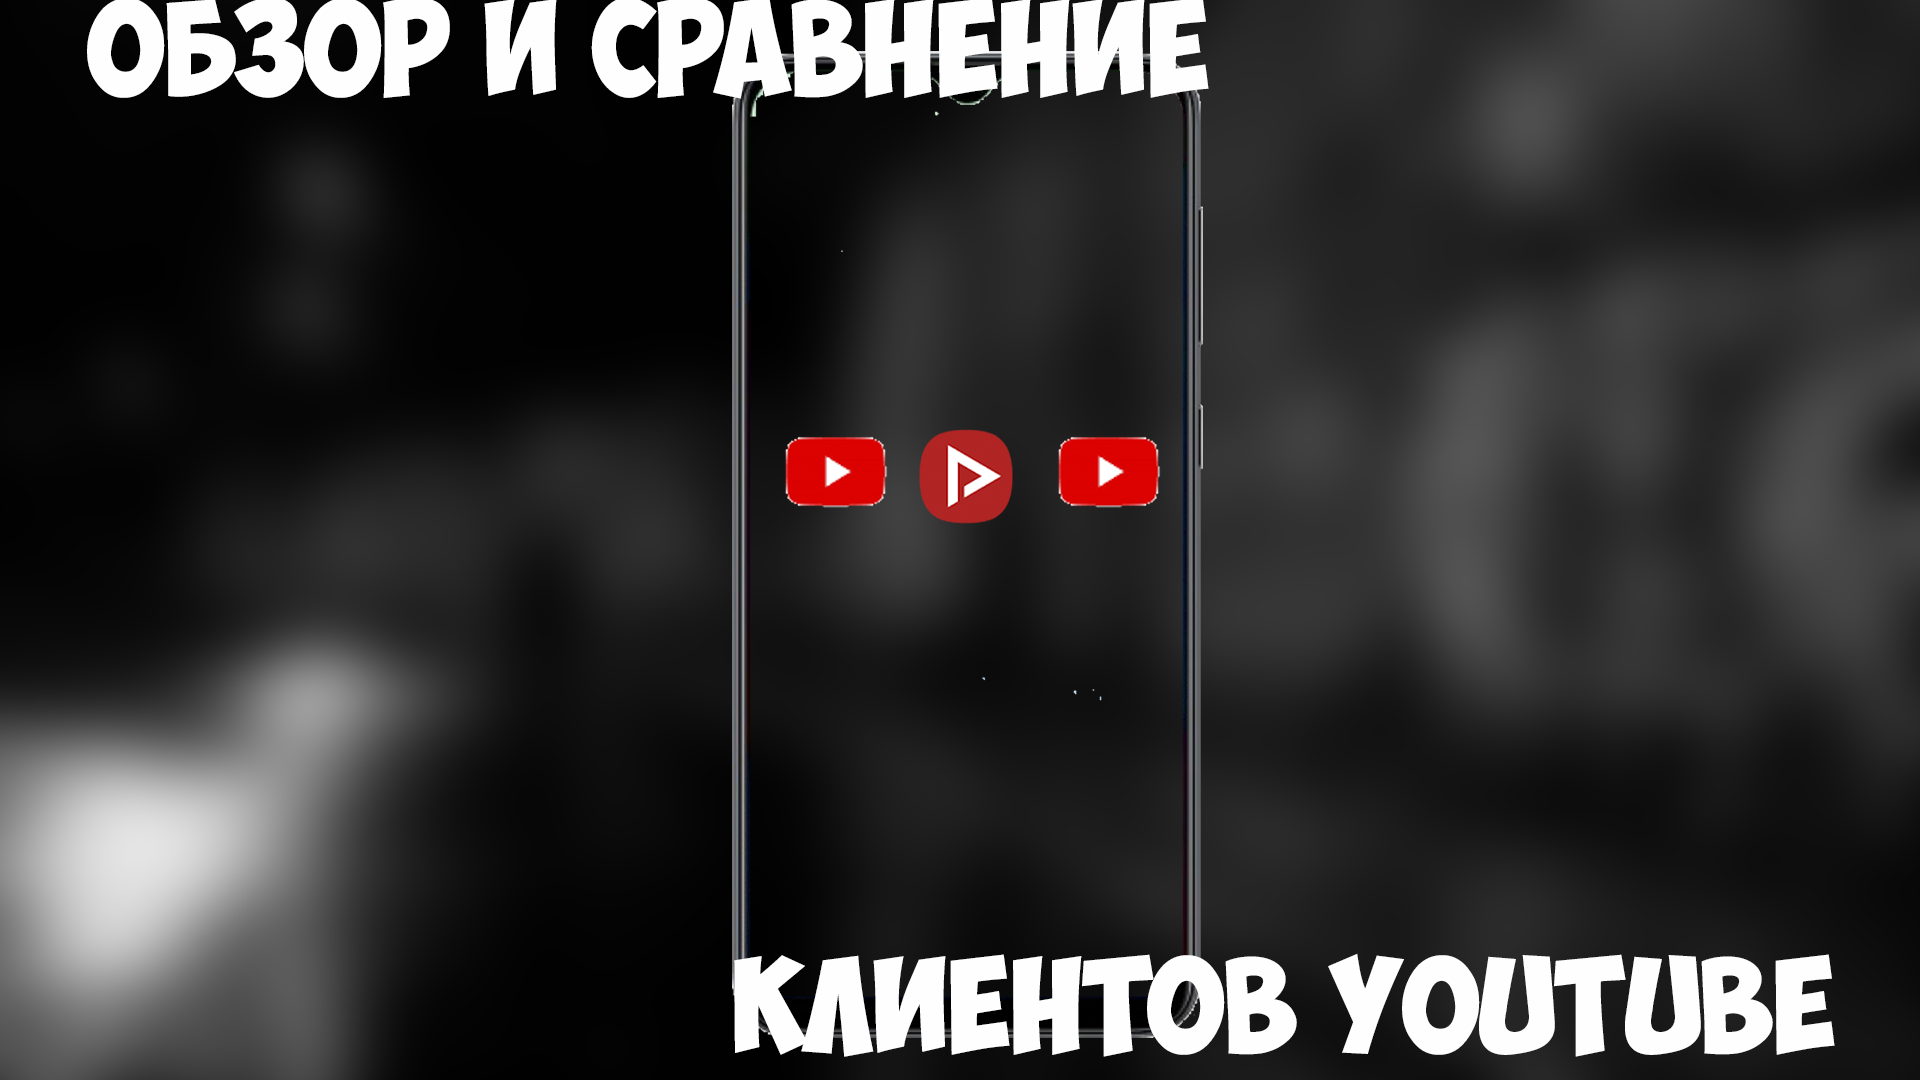 Youtube client